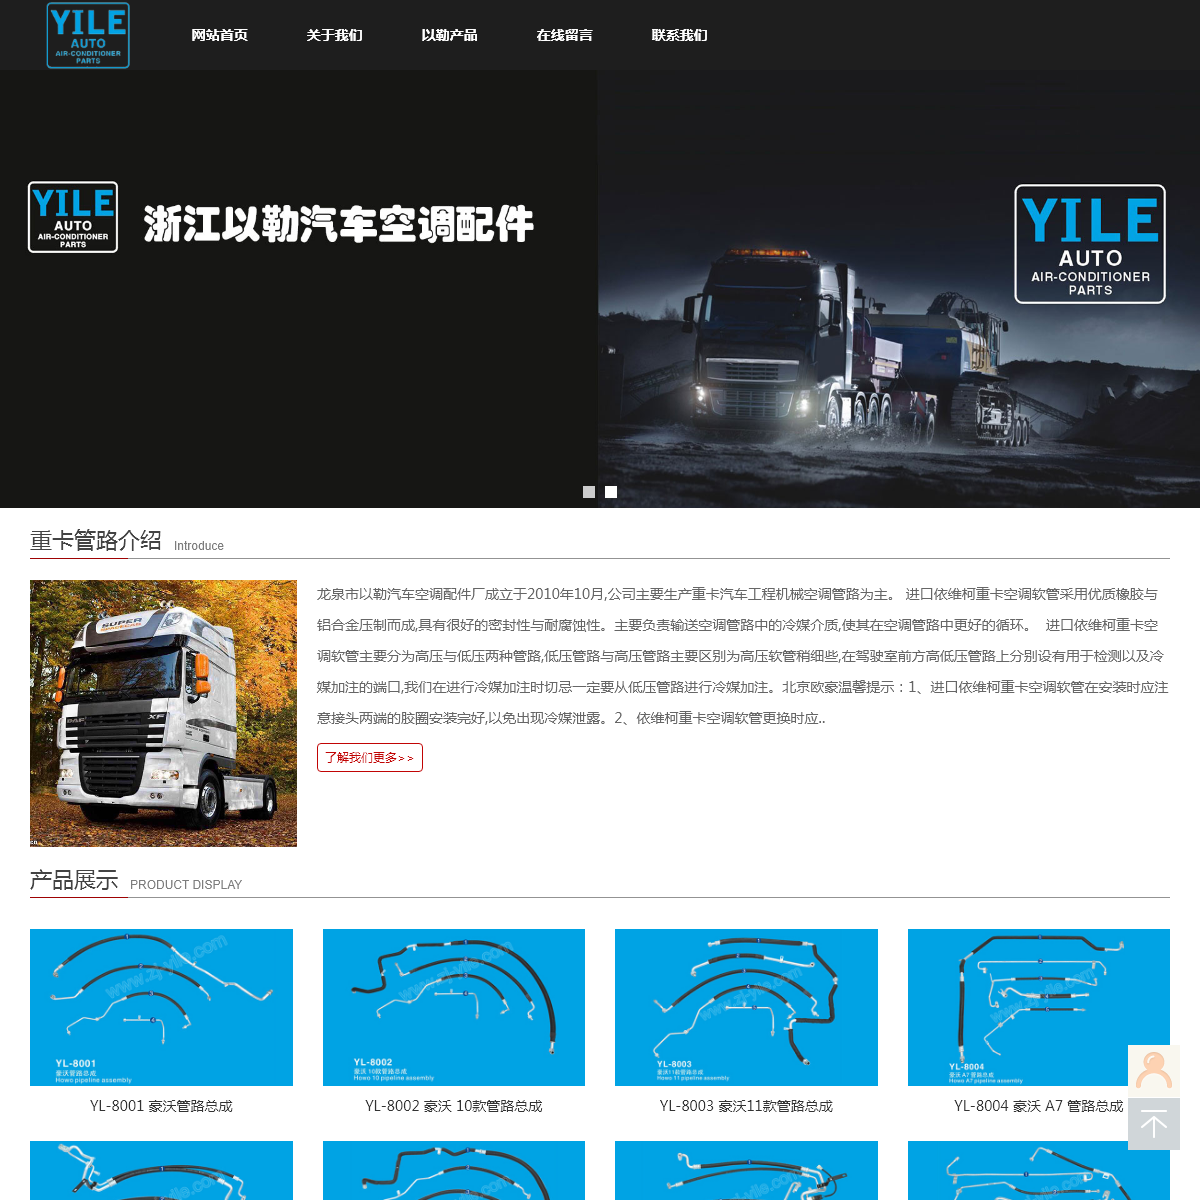 A complete backup of zj-yile.com